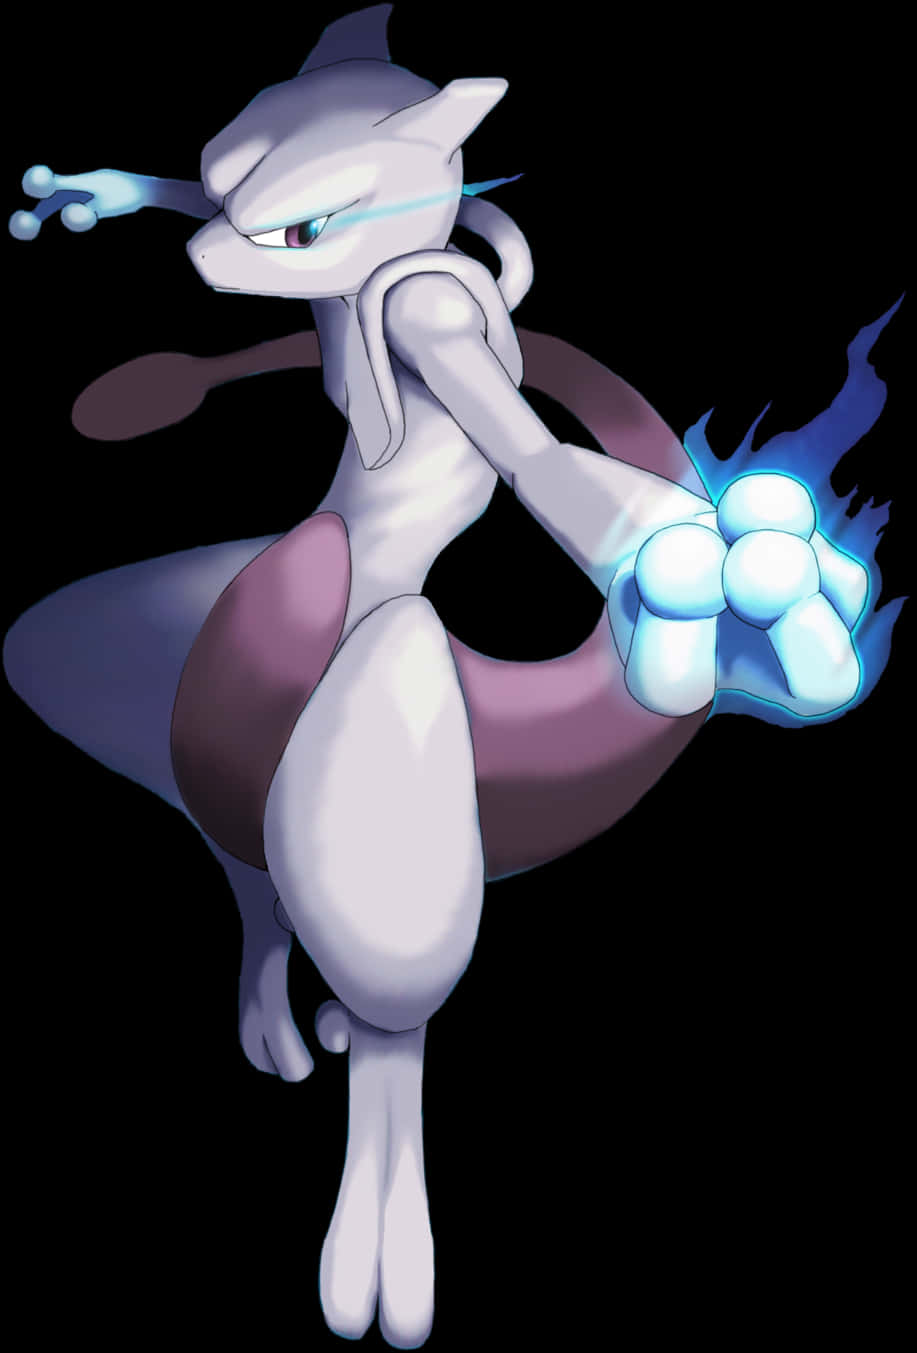 Cartoon Of A White Animal With Blue Flames